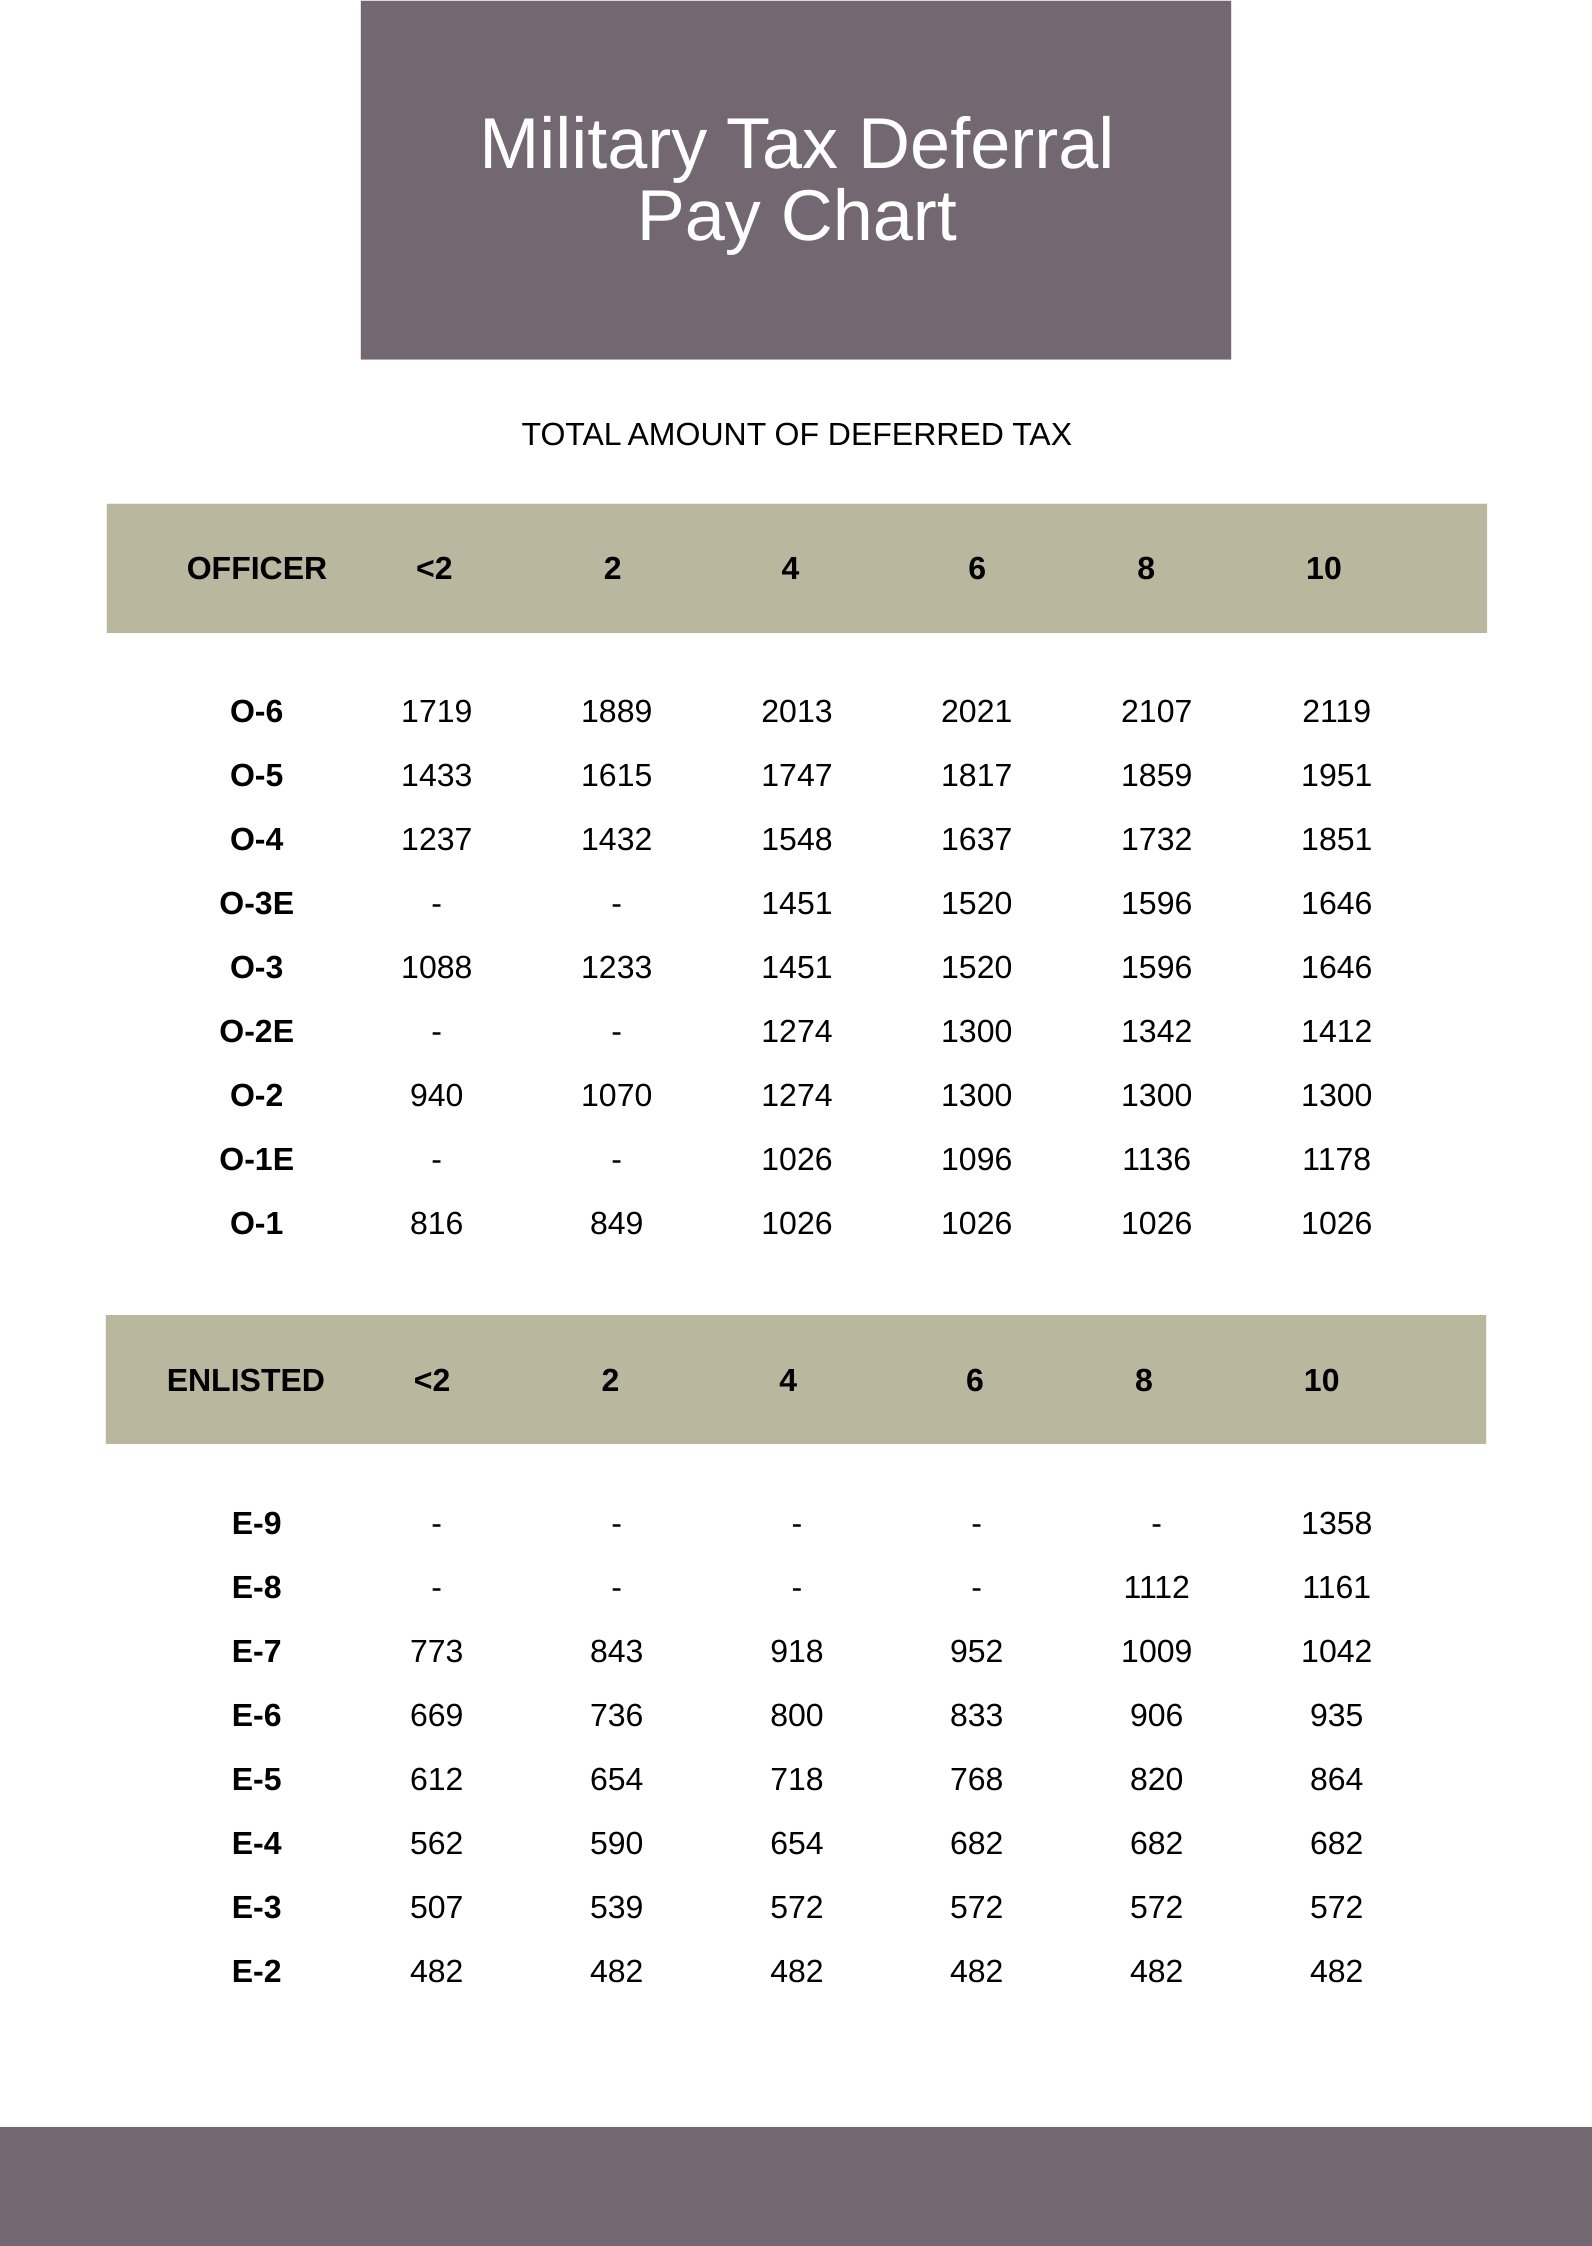 Free Military Tax Deferral Pay Chart in PDF